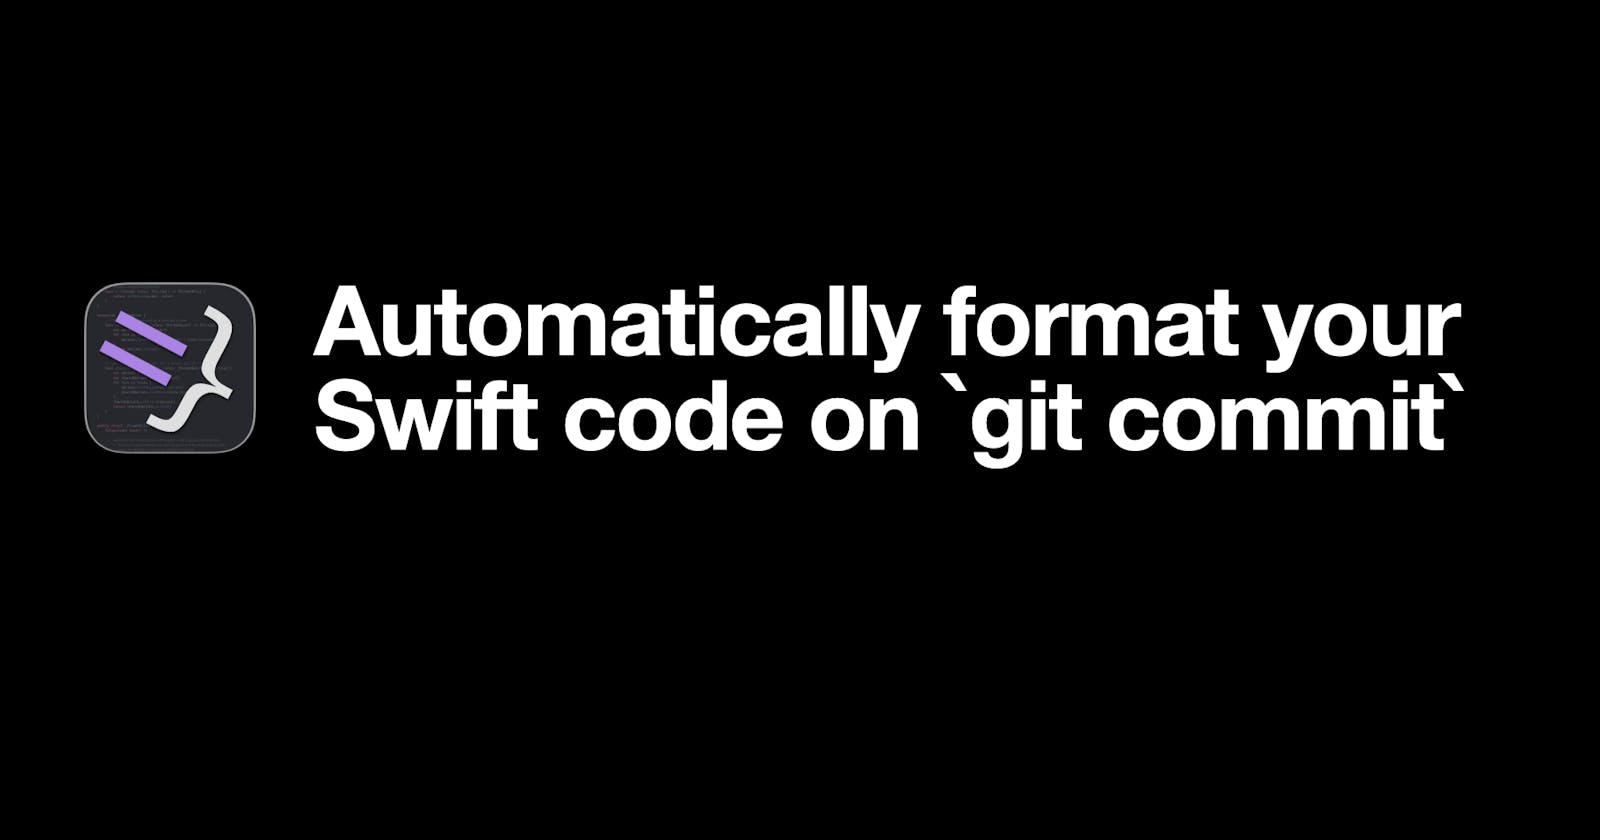 Automatically format your Swift code when committing your work